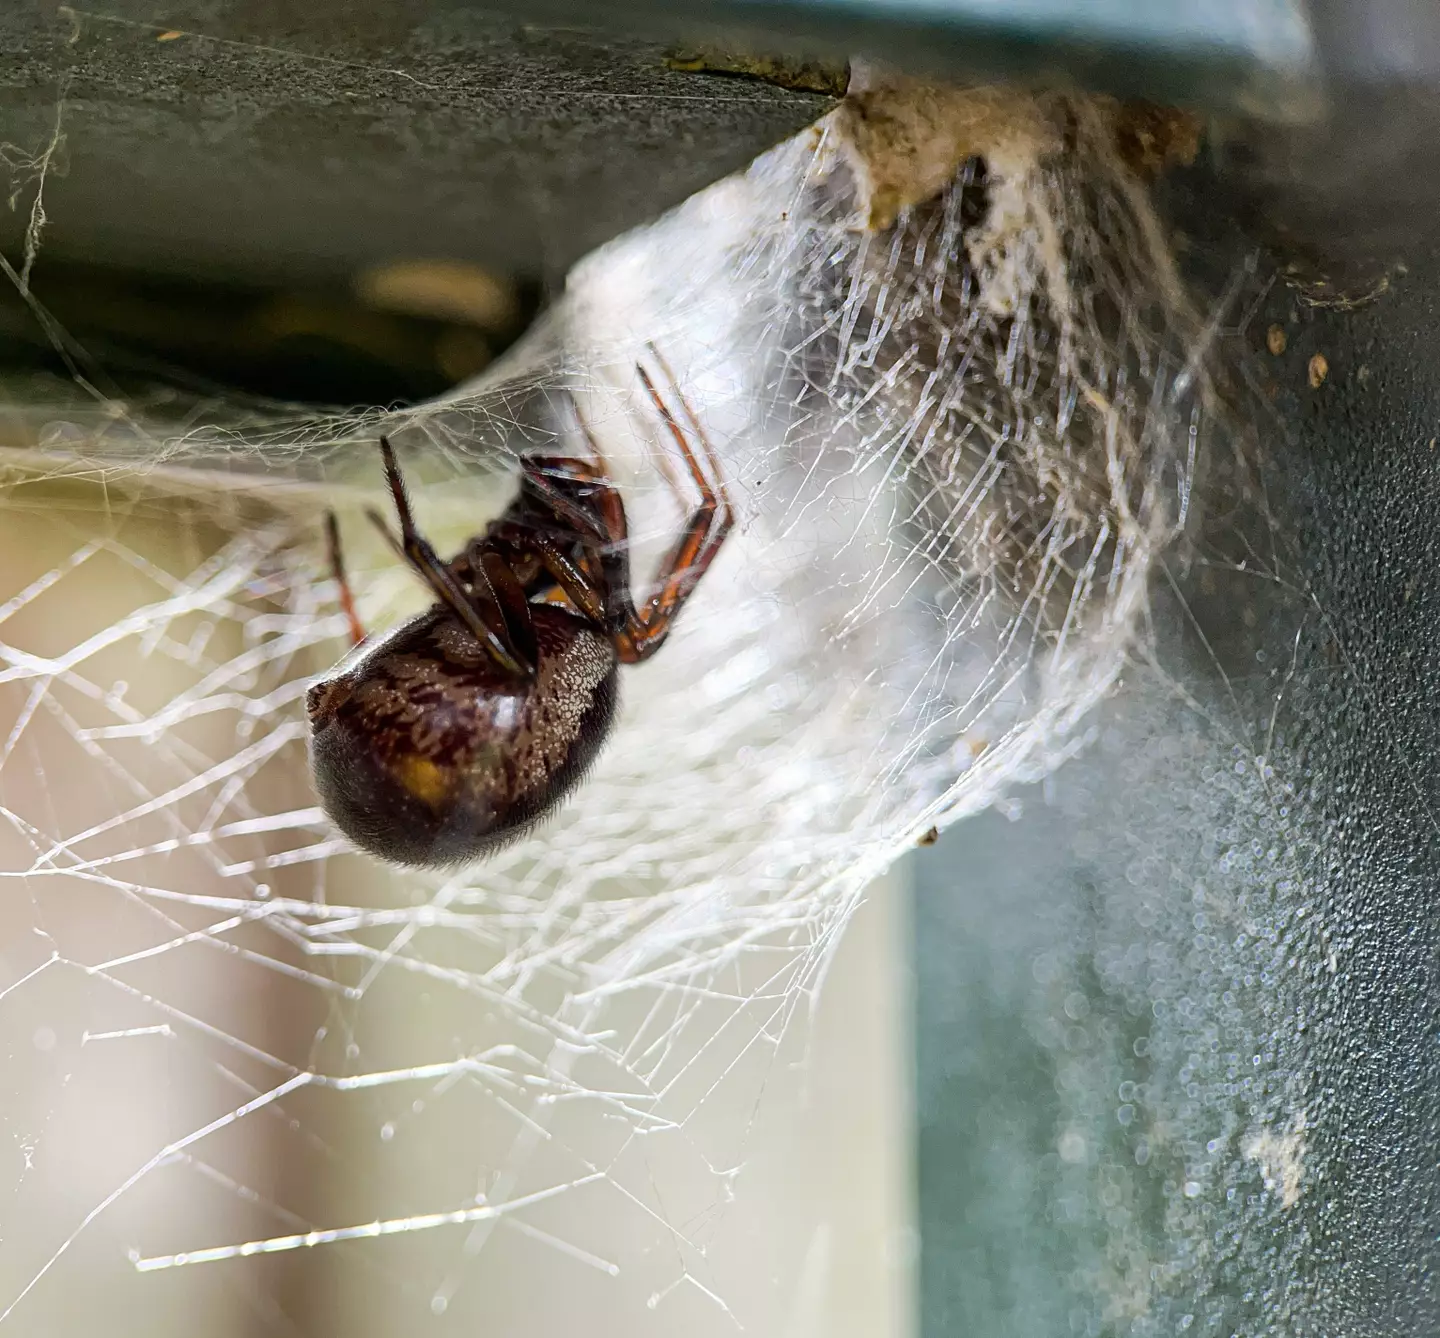 Identifying the spider first is crucial before deciding your plan of action. (Getty Stock Photo)